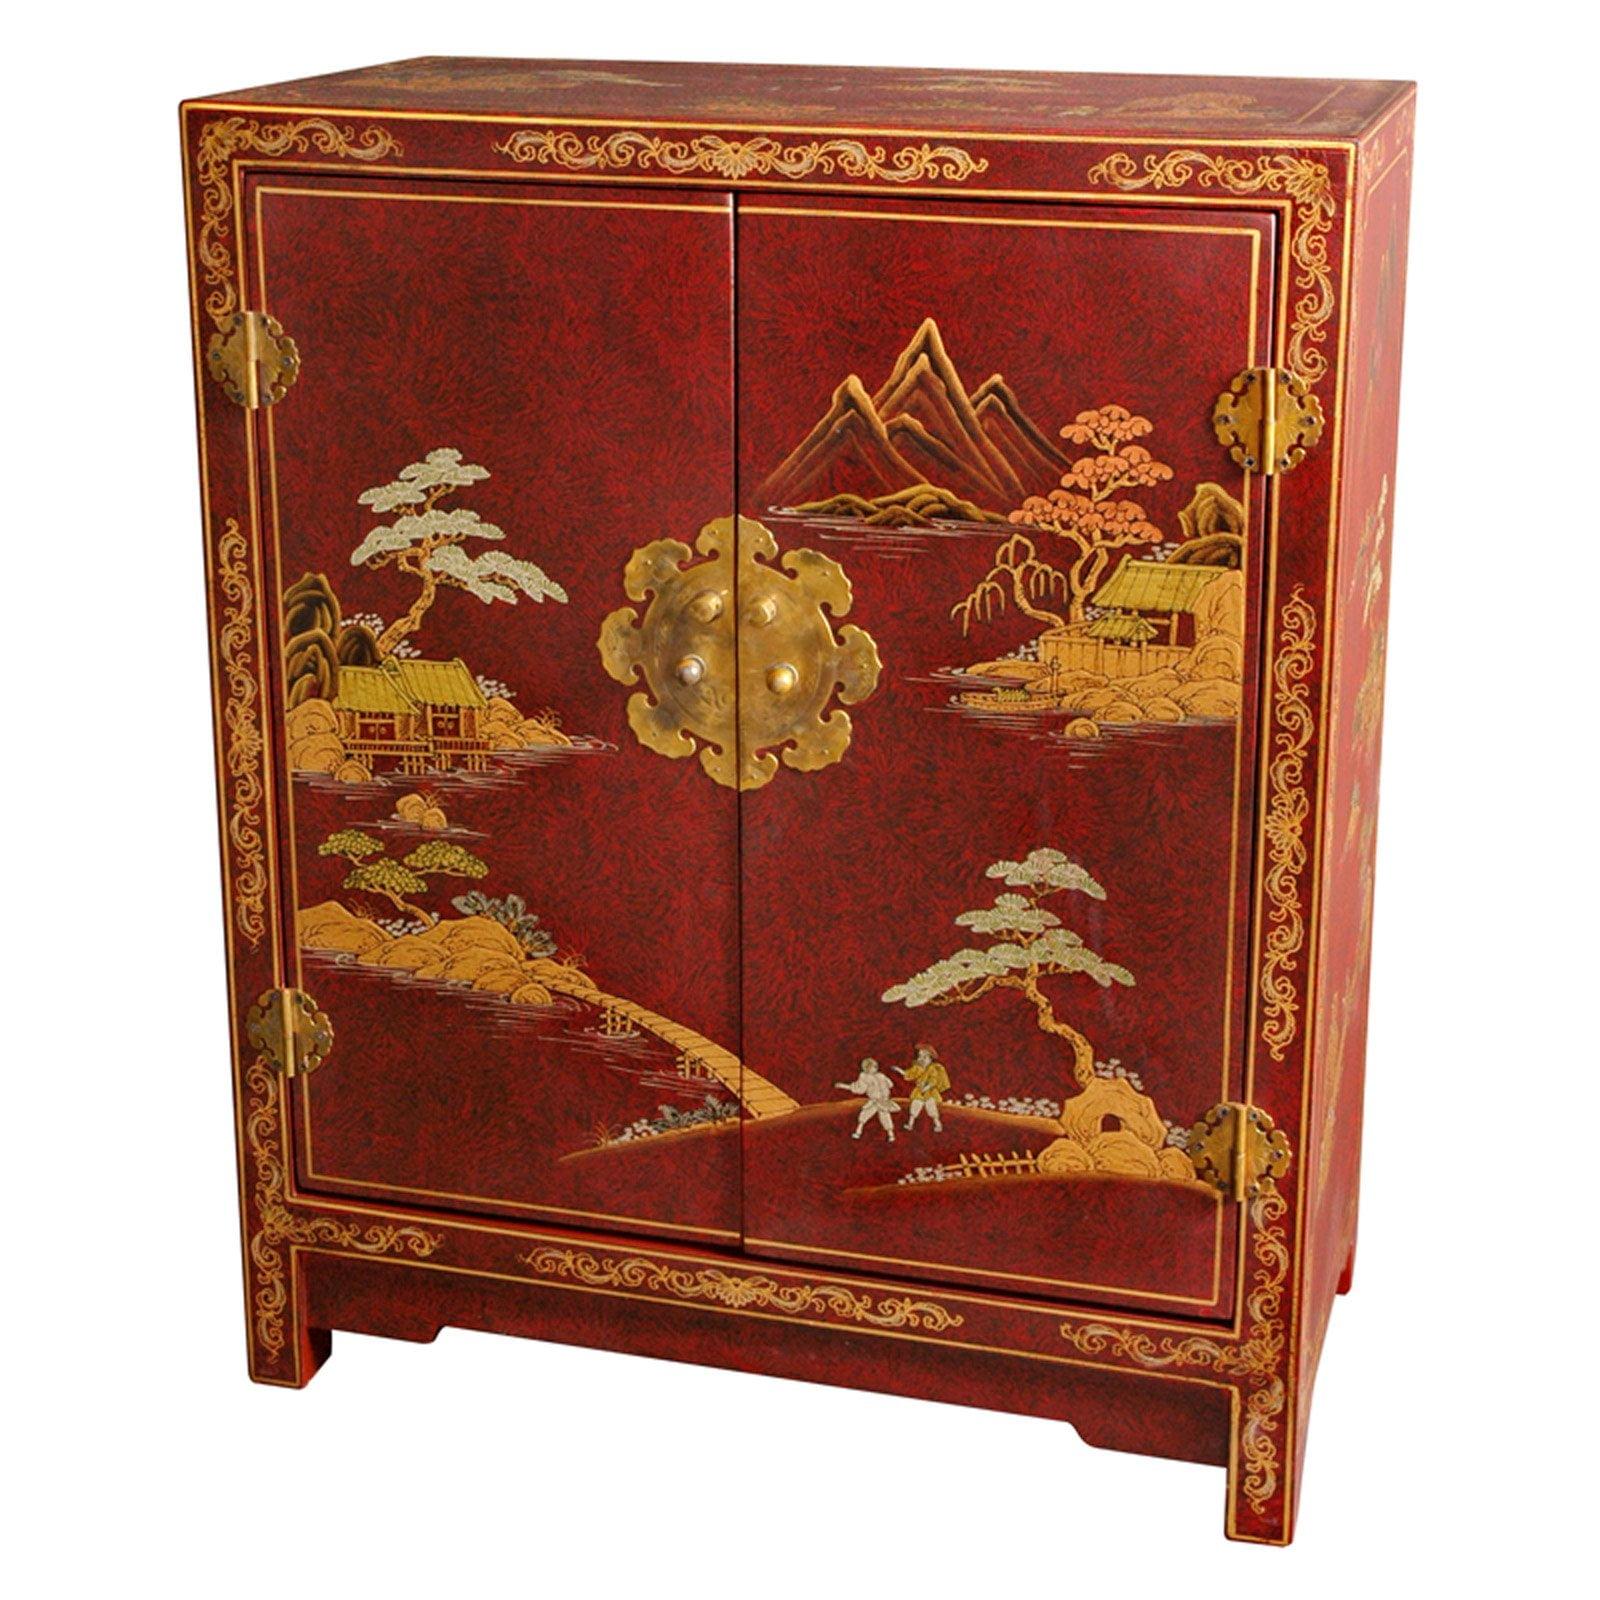 Handcrafted Red Lacquer Oriental Cabinet with Antique Brass Hardware